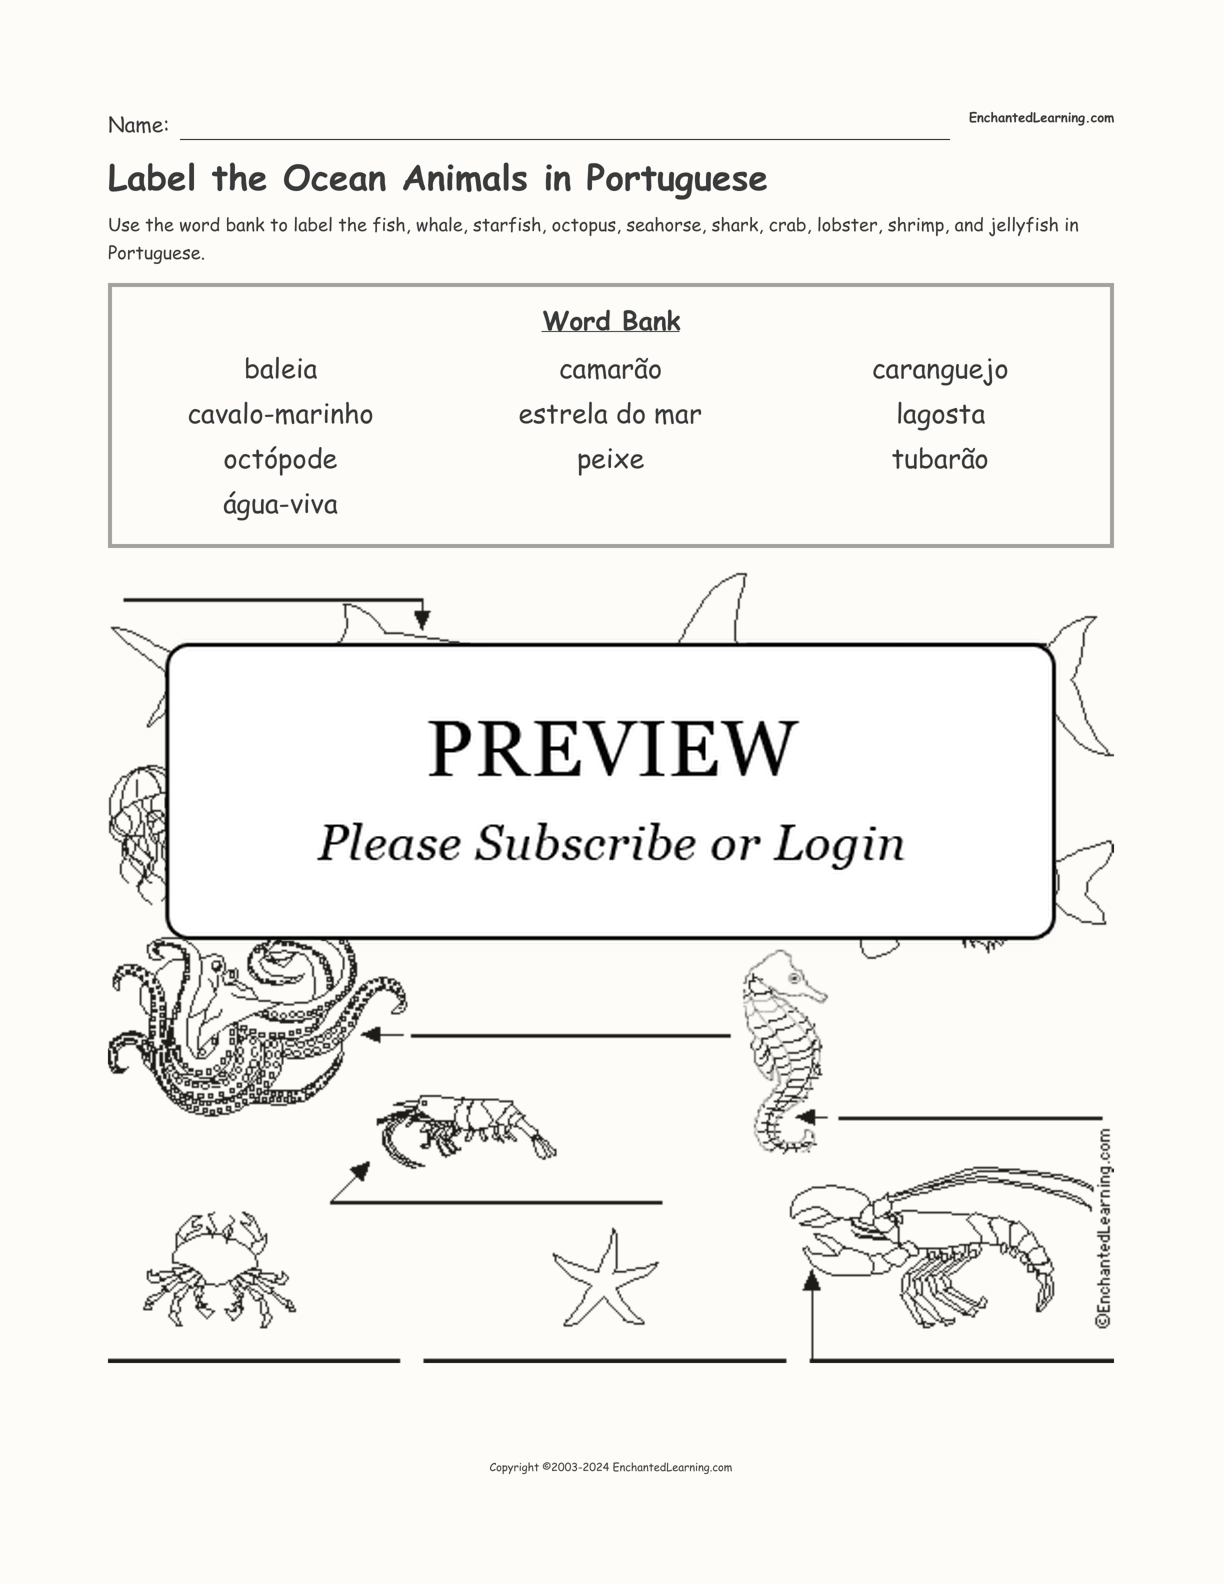 Label the Ocean Animals in Portuguese interactive worksheet page 1